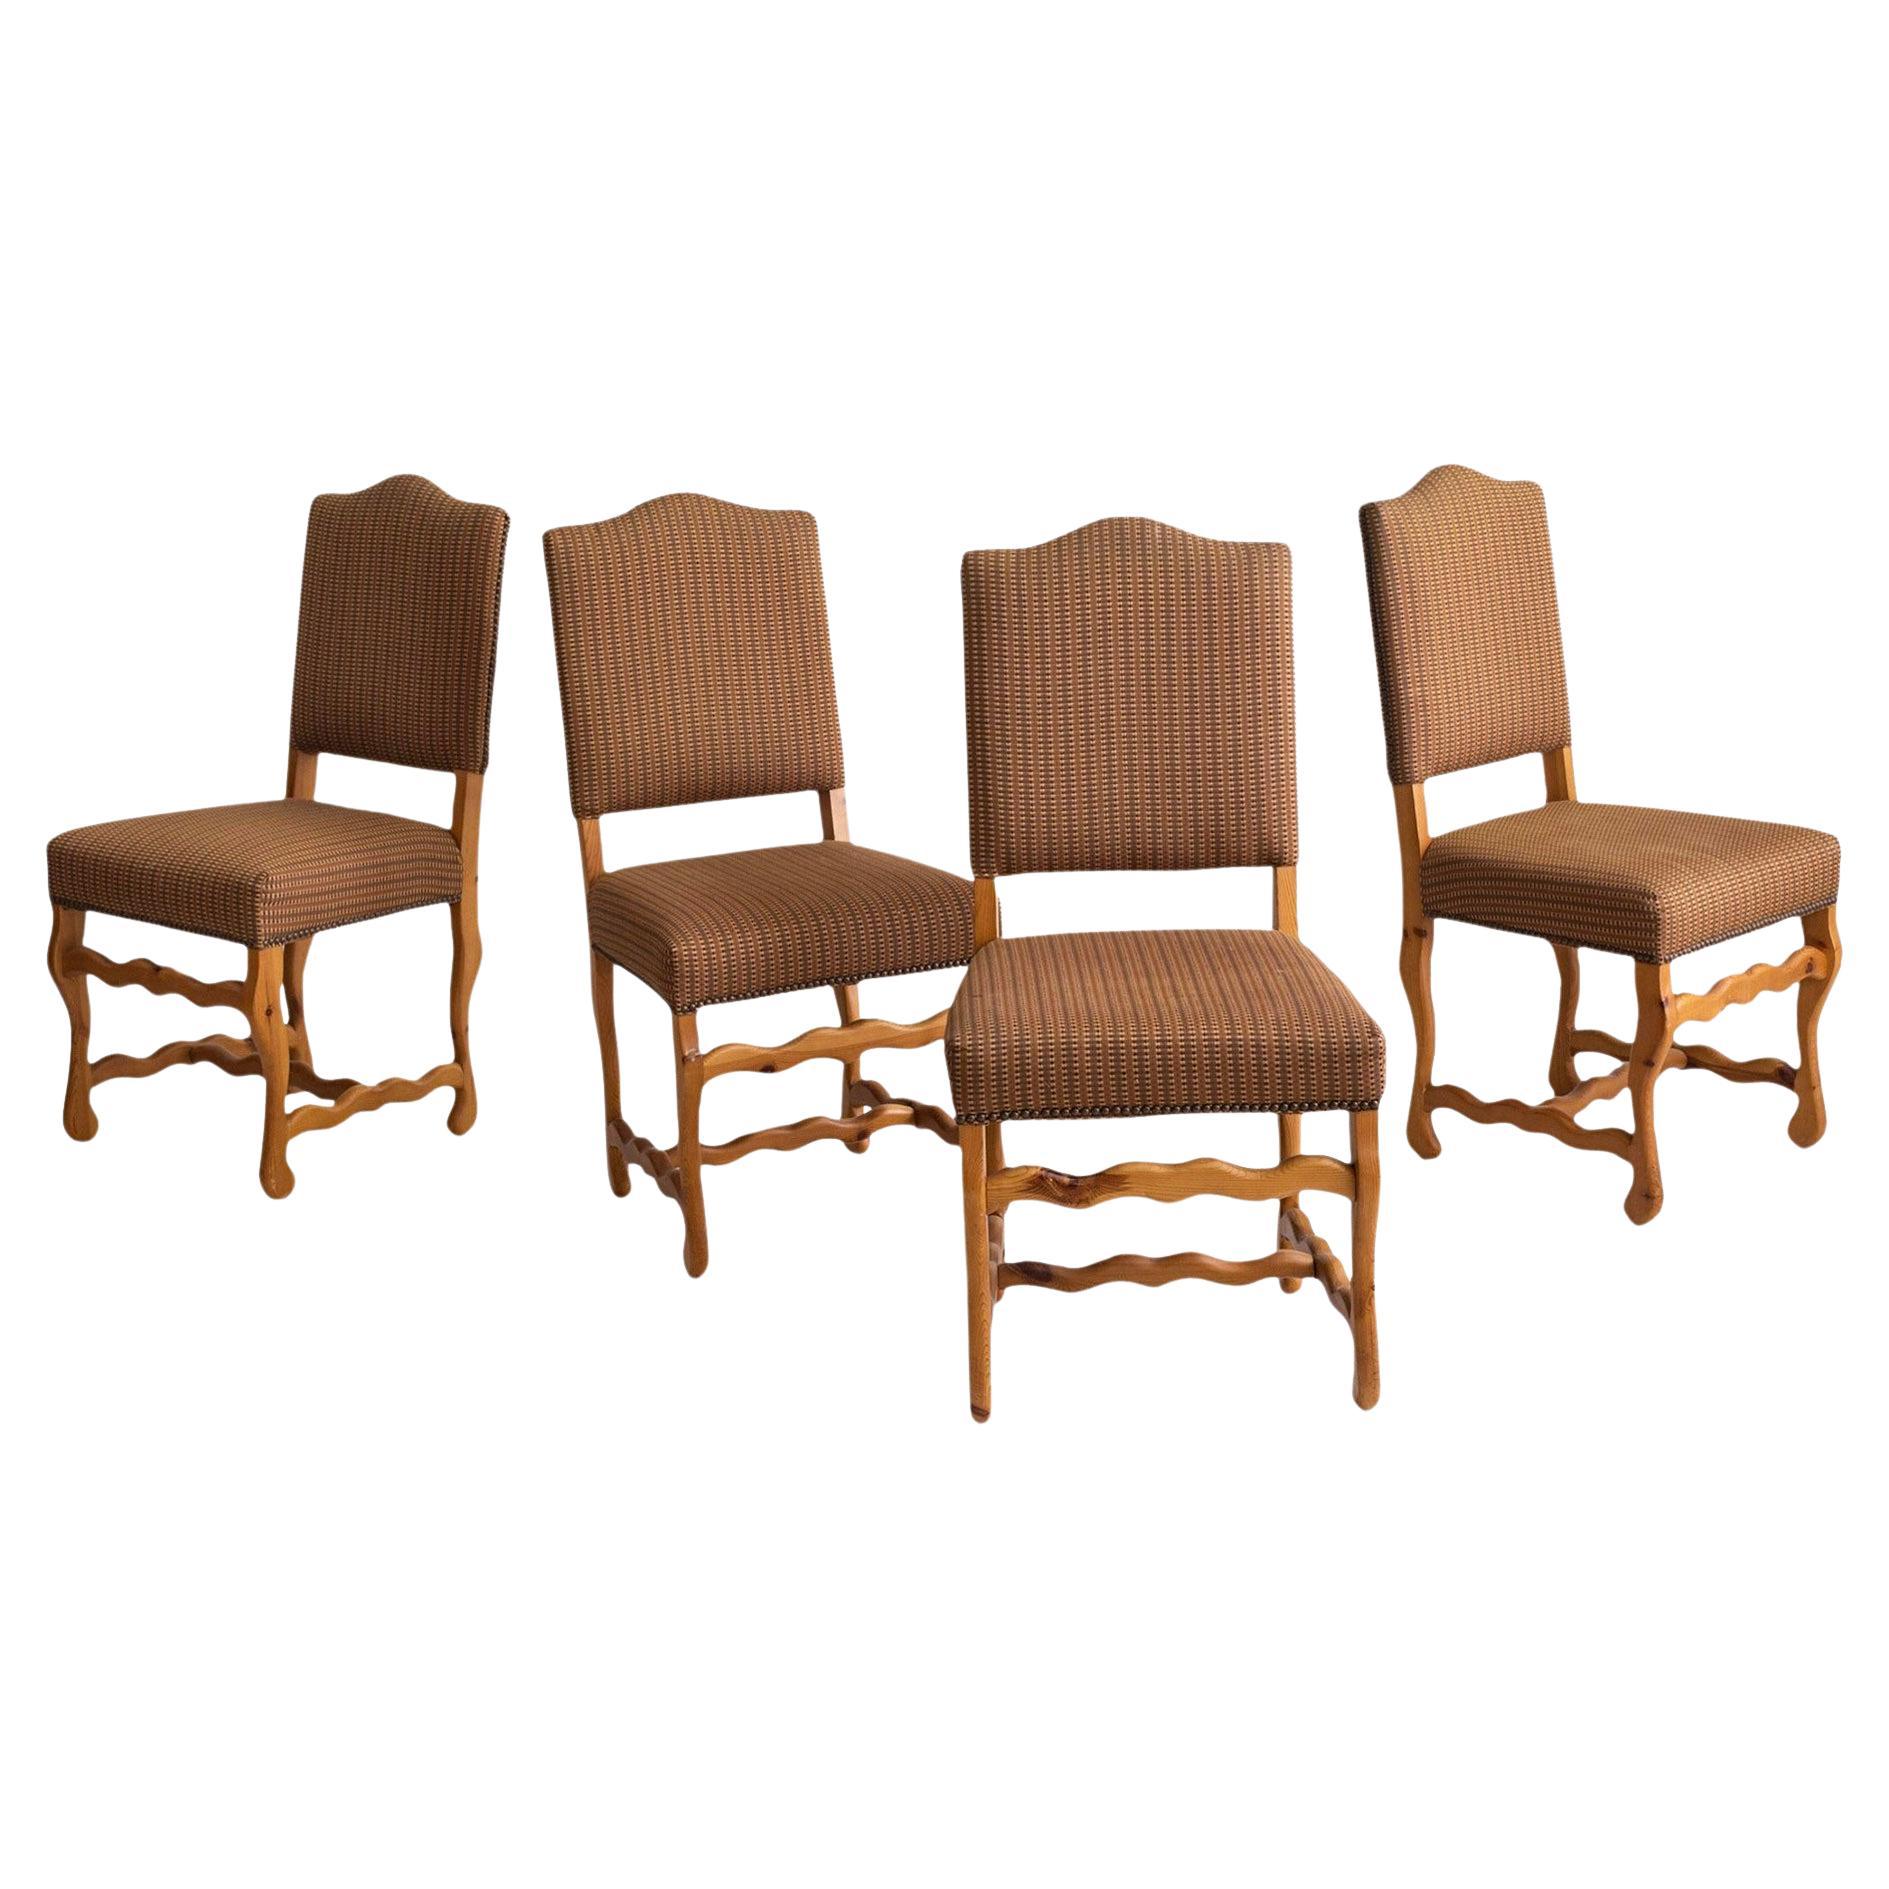 Post Modern 'Squiggle' Form Knotty Pine Dining Chairs - A Set of 4